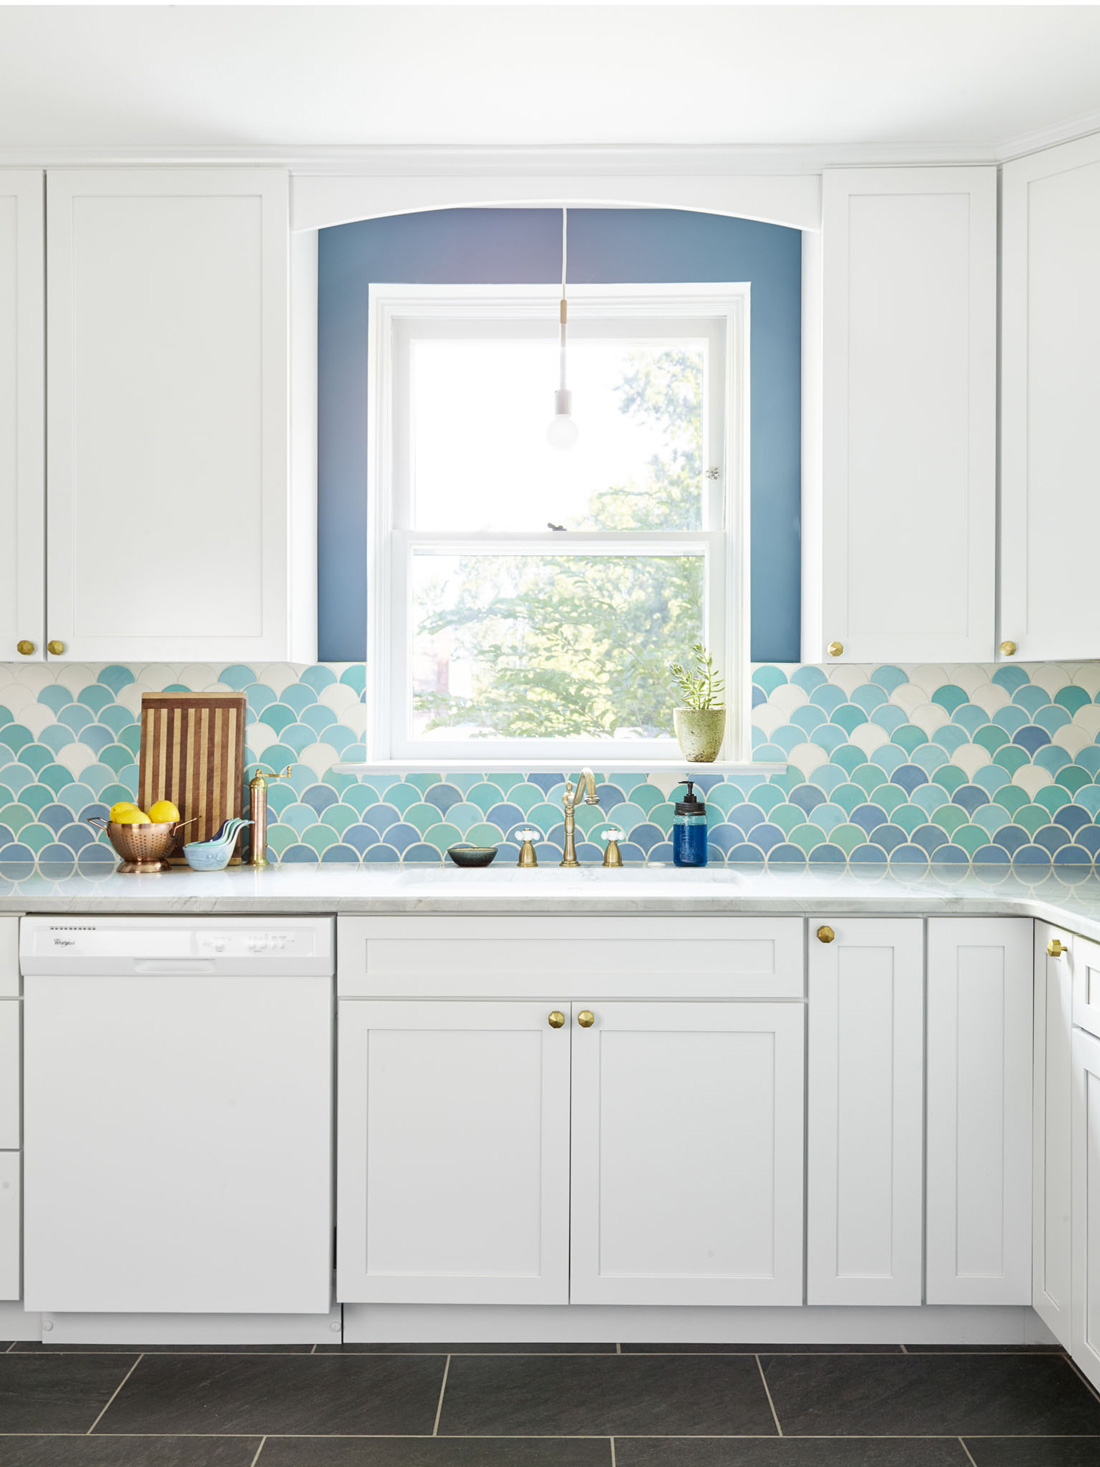 A blue fish-scale backsplash with white kitchen cabinets